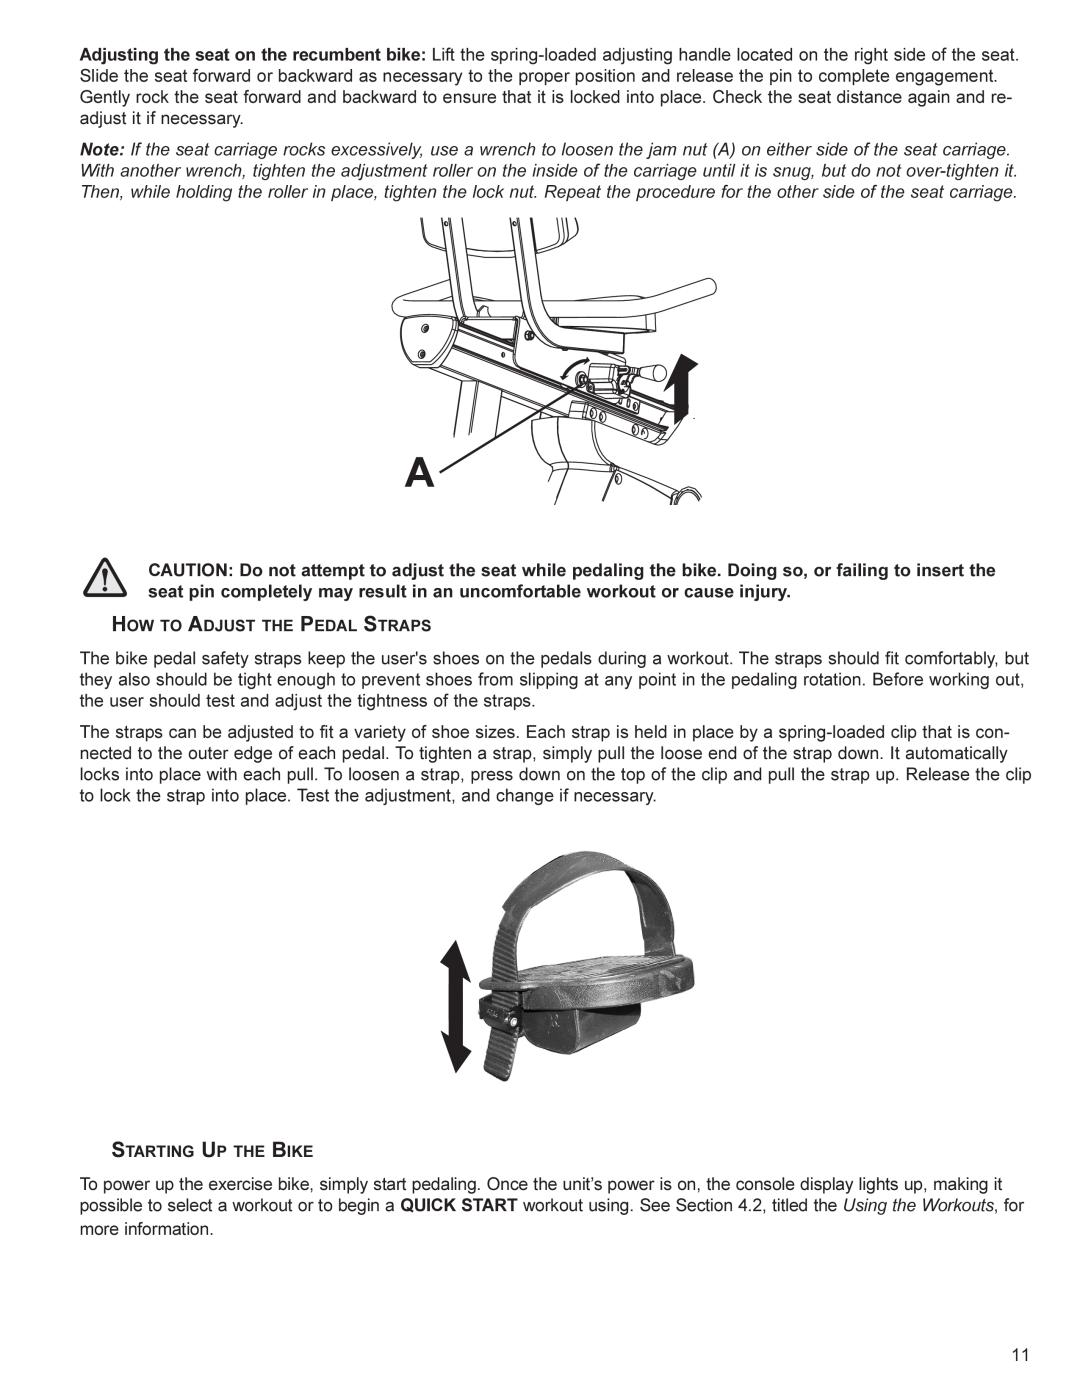 Life Fitness SR70 user manual How To Adjust The Pedal Straps, Starting Up The Bike 